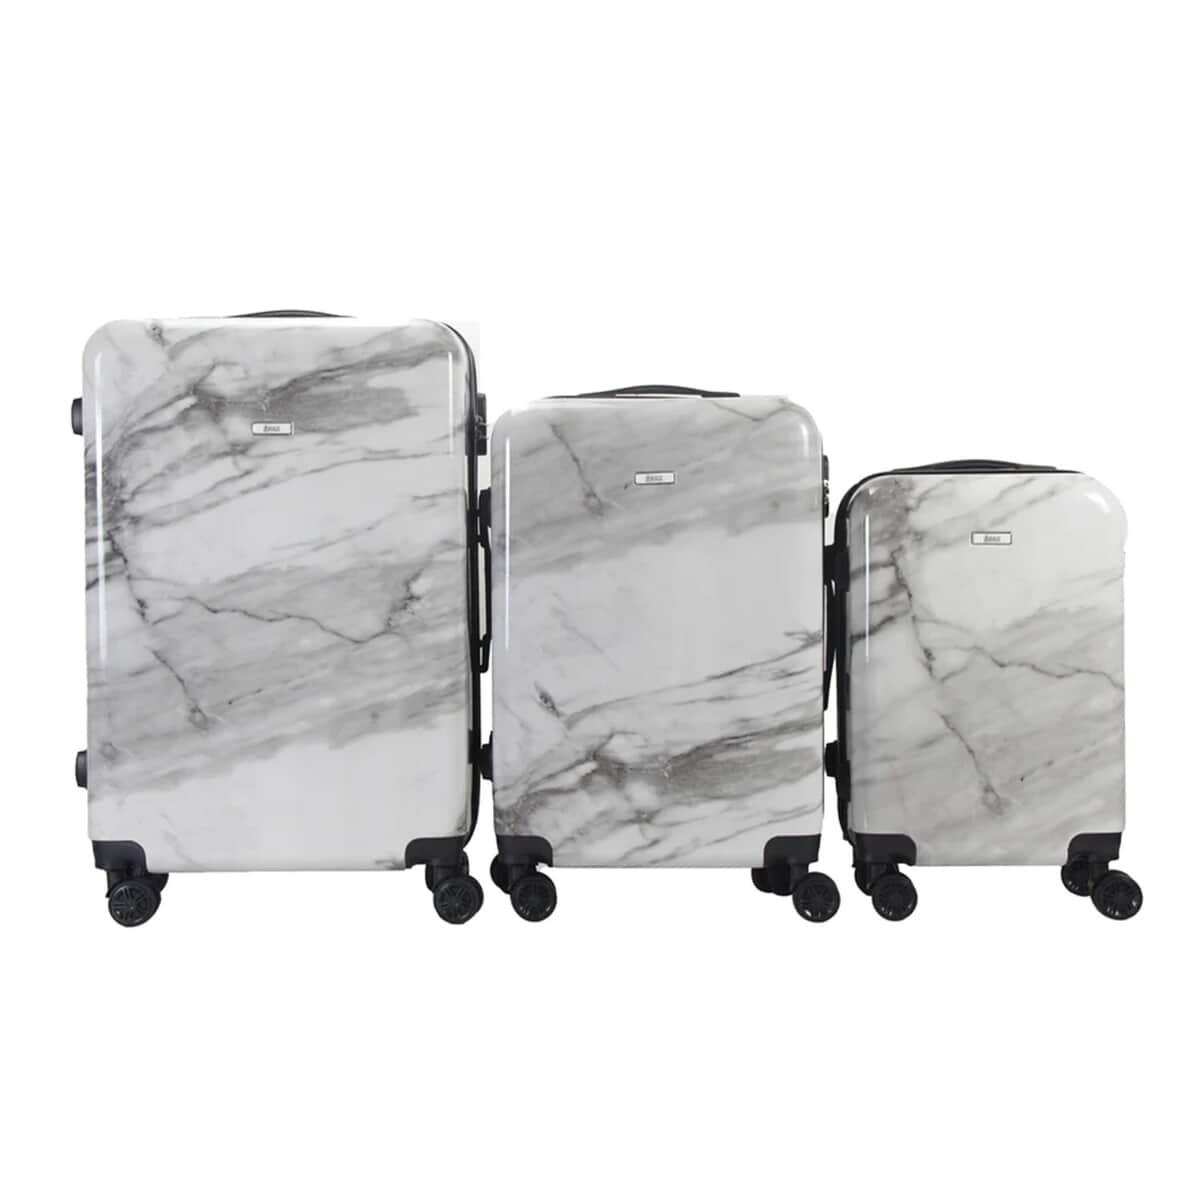 Mirage-Tanya 3 Piece White Marble Luggage Set with 360 Dual Spinning Wheels and Combo Lock image number 5